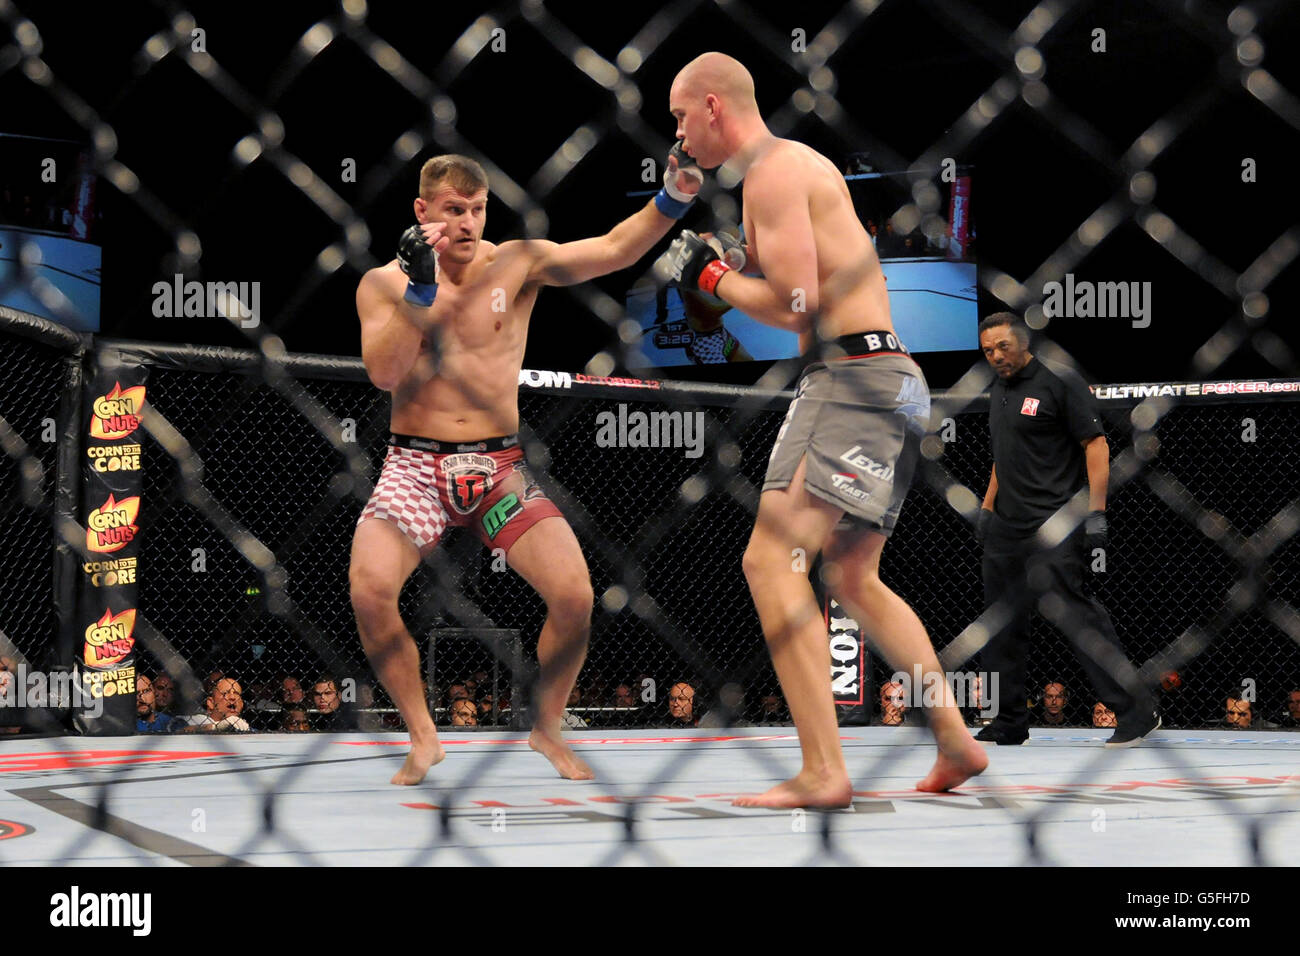 Stipe Miocic (l) punches Stefan Struve (r) during the UFC on Fuel event at Nottingham's Capital FM Arena Stock Photo